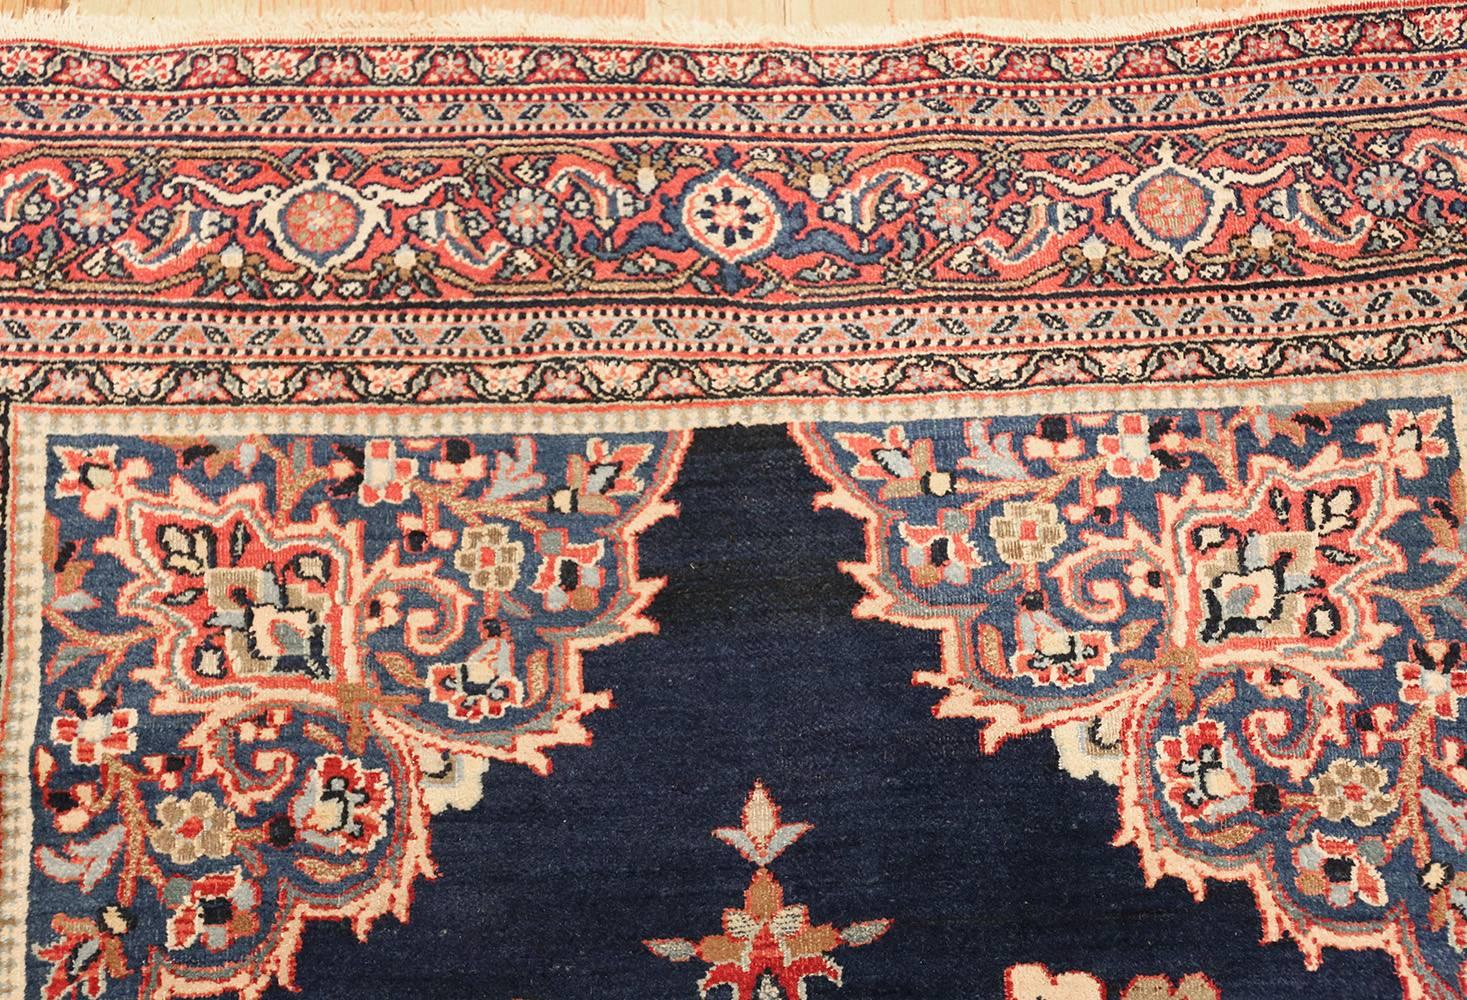 Wool Beautiful Antique Persian Khorassan Rug. Size: 4 ft 5 in x 6 ft 8 in